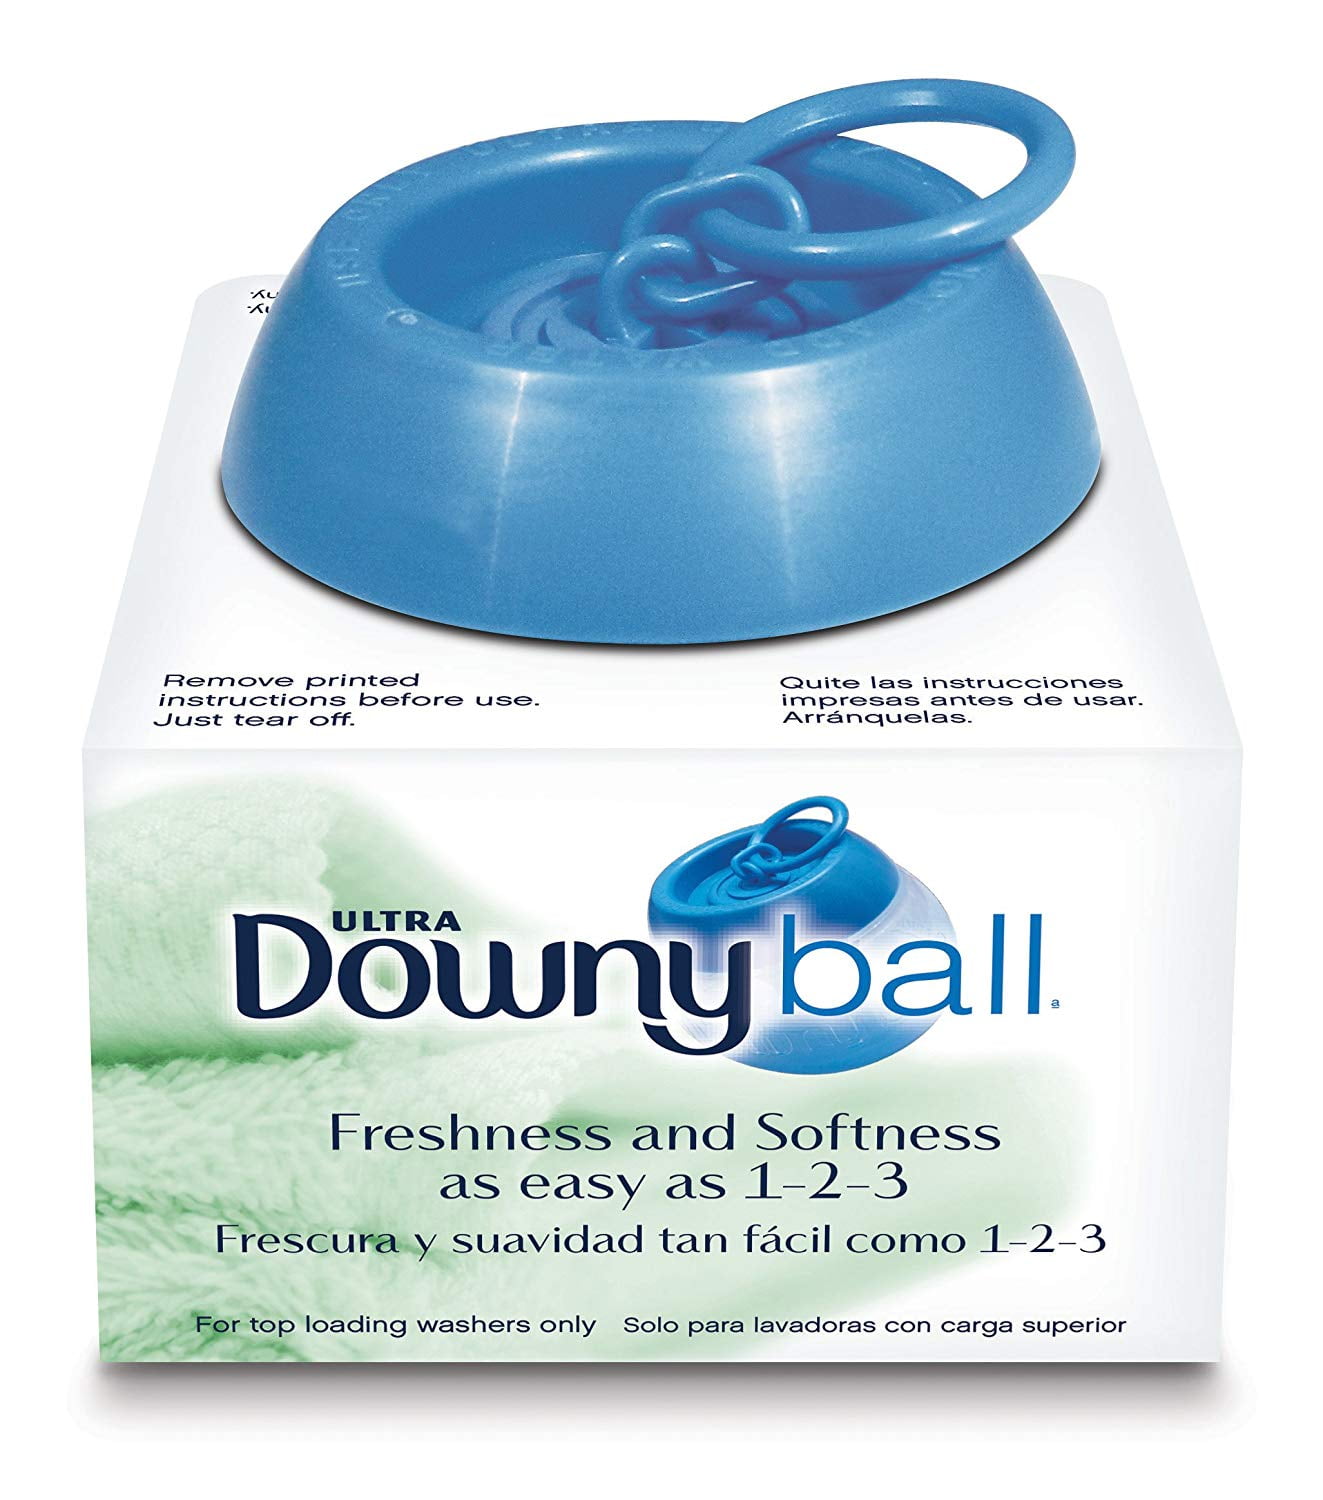 Downy Laundry Fabric Softner Automatic Dispenser Container Blue Ball New 